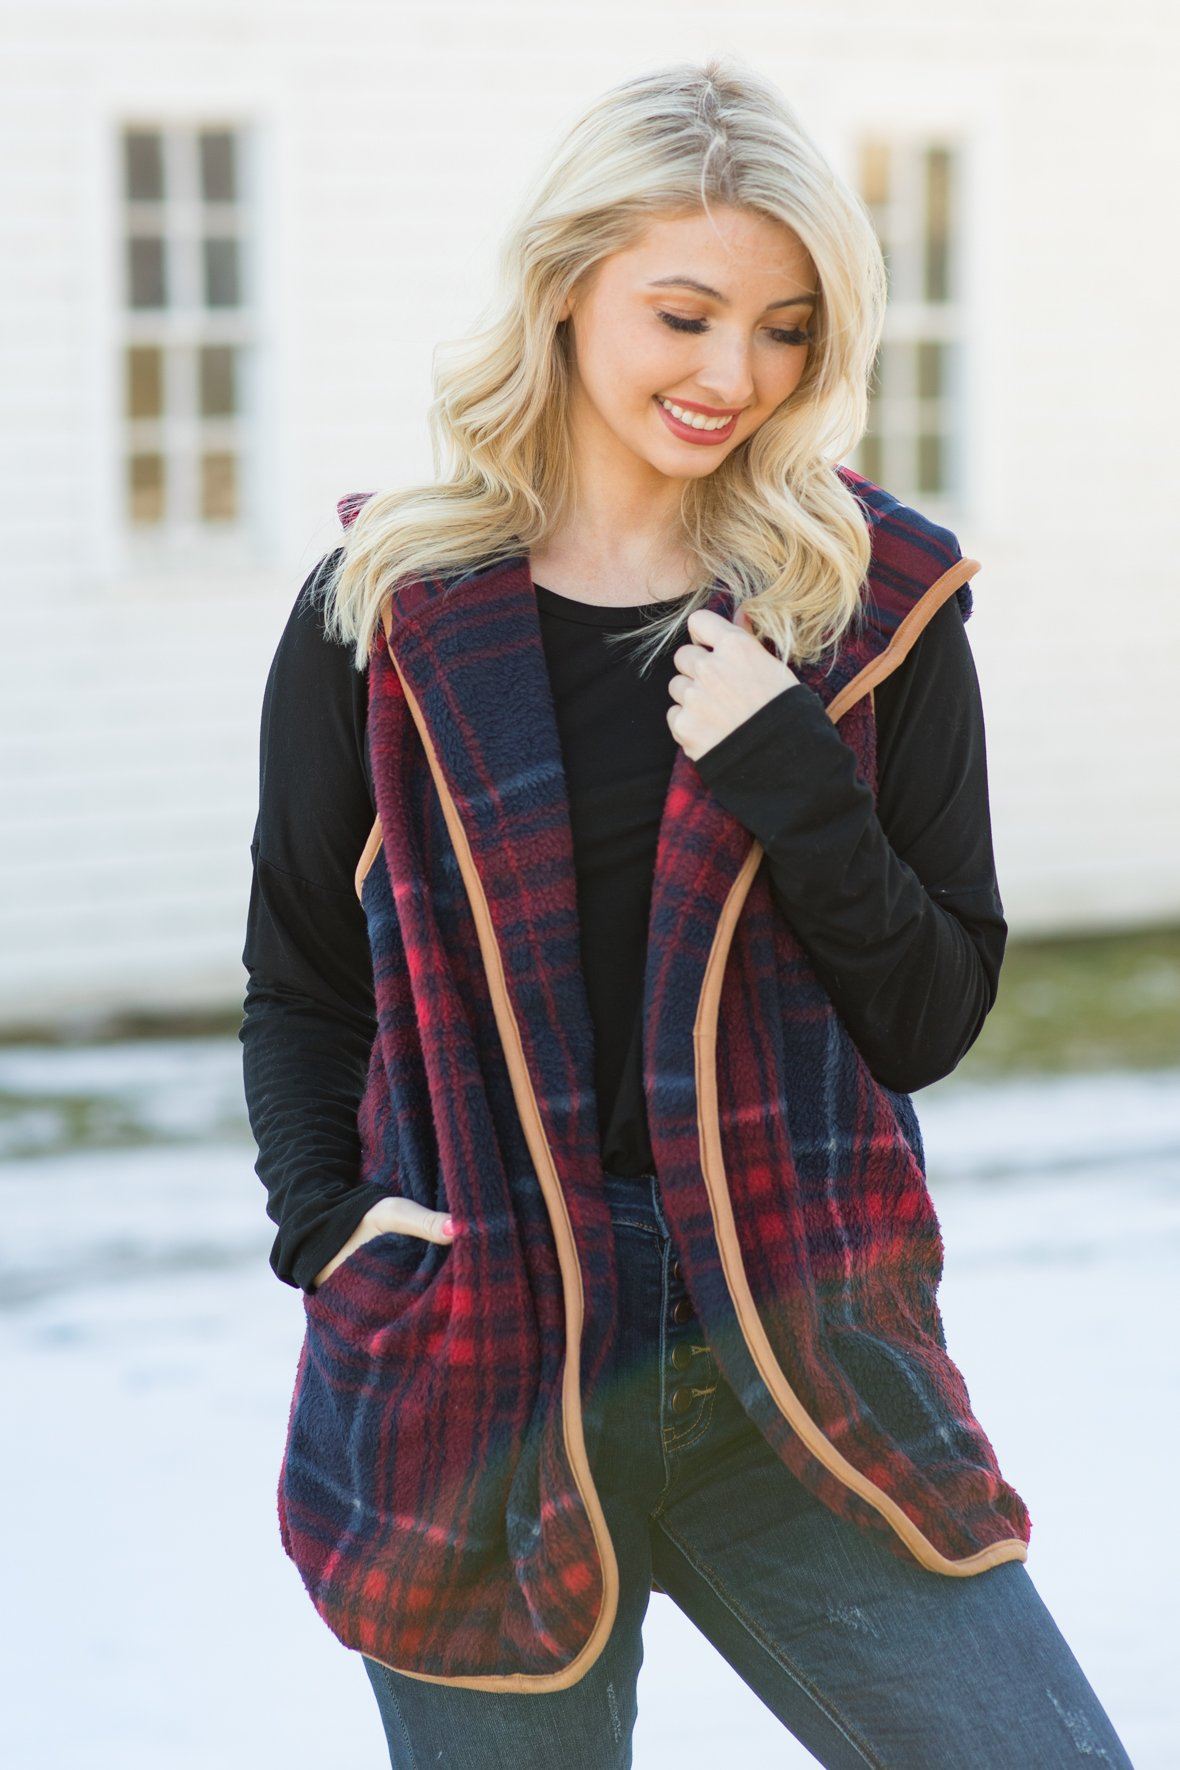 Adventures Ahead Buffalo Plaid Vest in Red & Black - Filly Flair